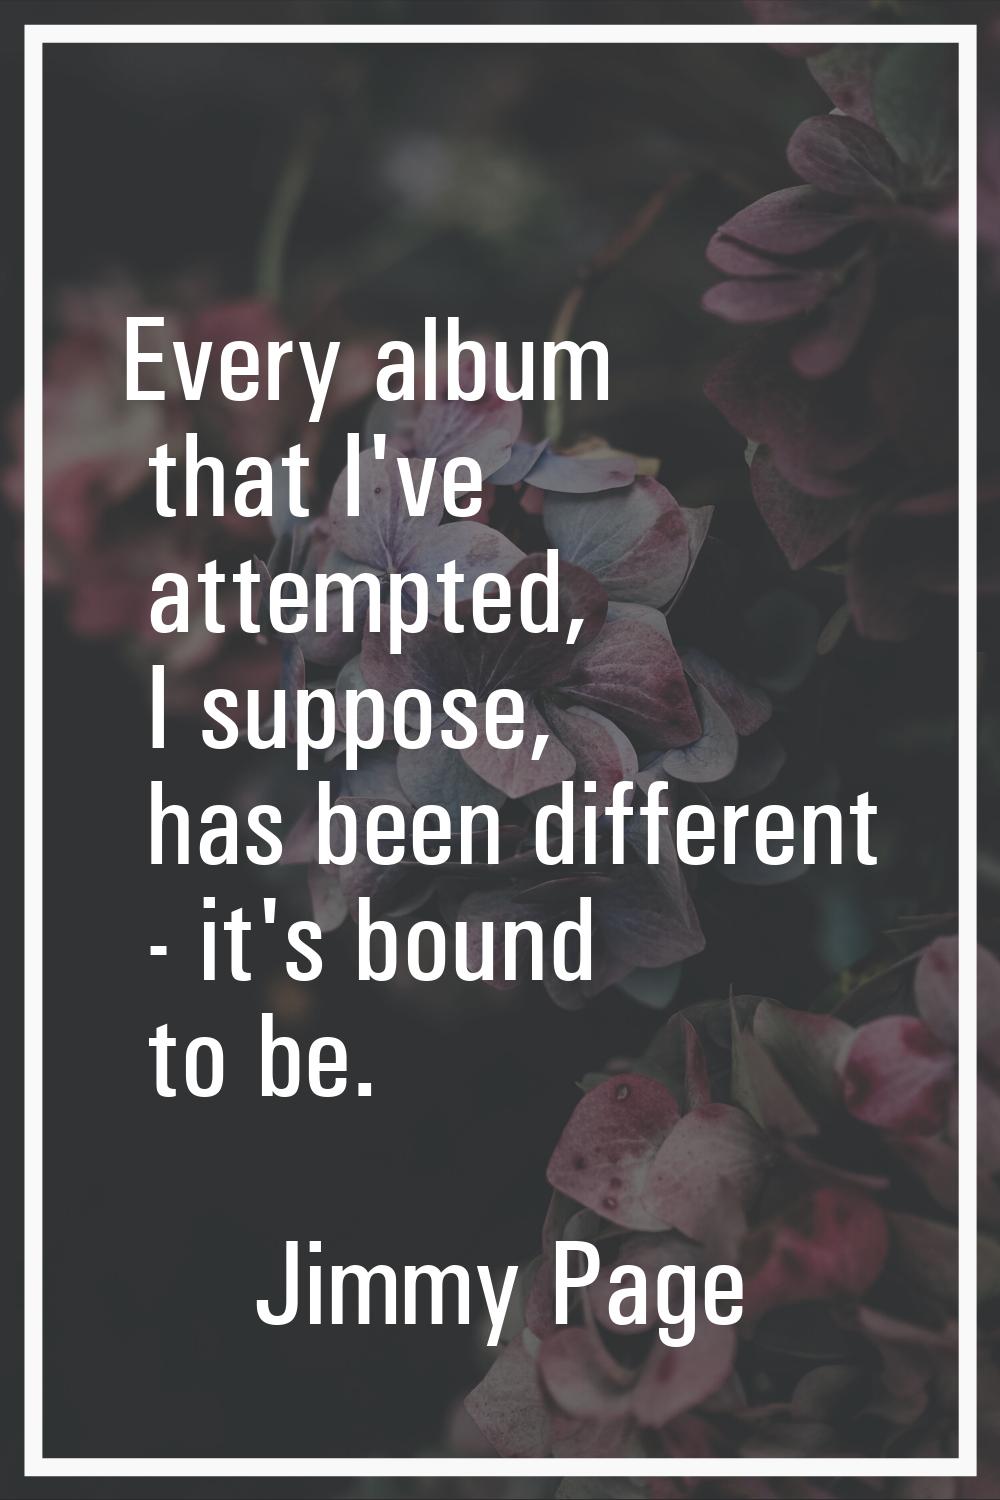 Every album that I've attempted, I suppose, has been different - it's bound to be.